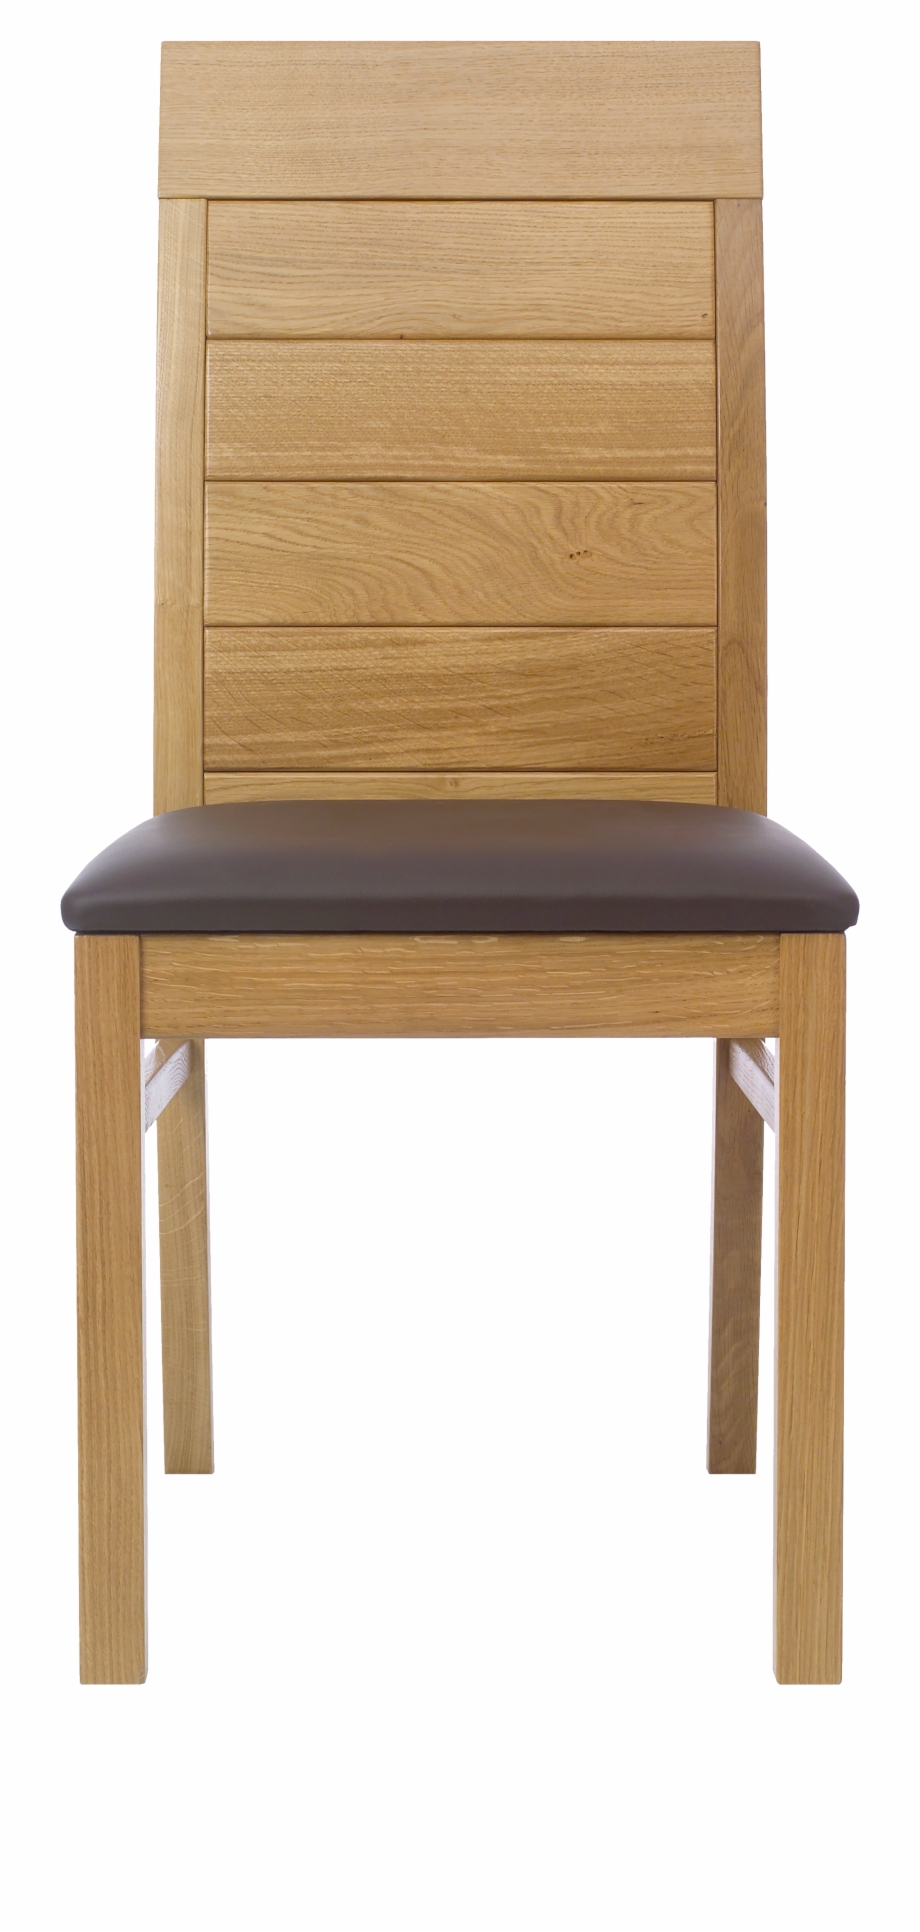 Chair Png Image Transparent Background Wooden Chair Png